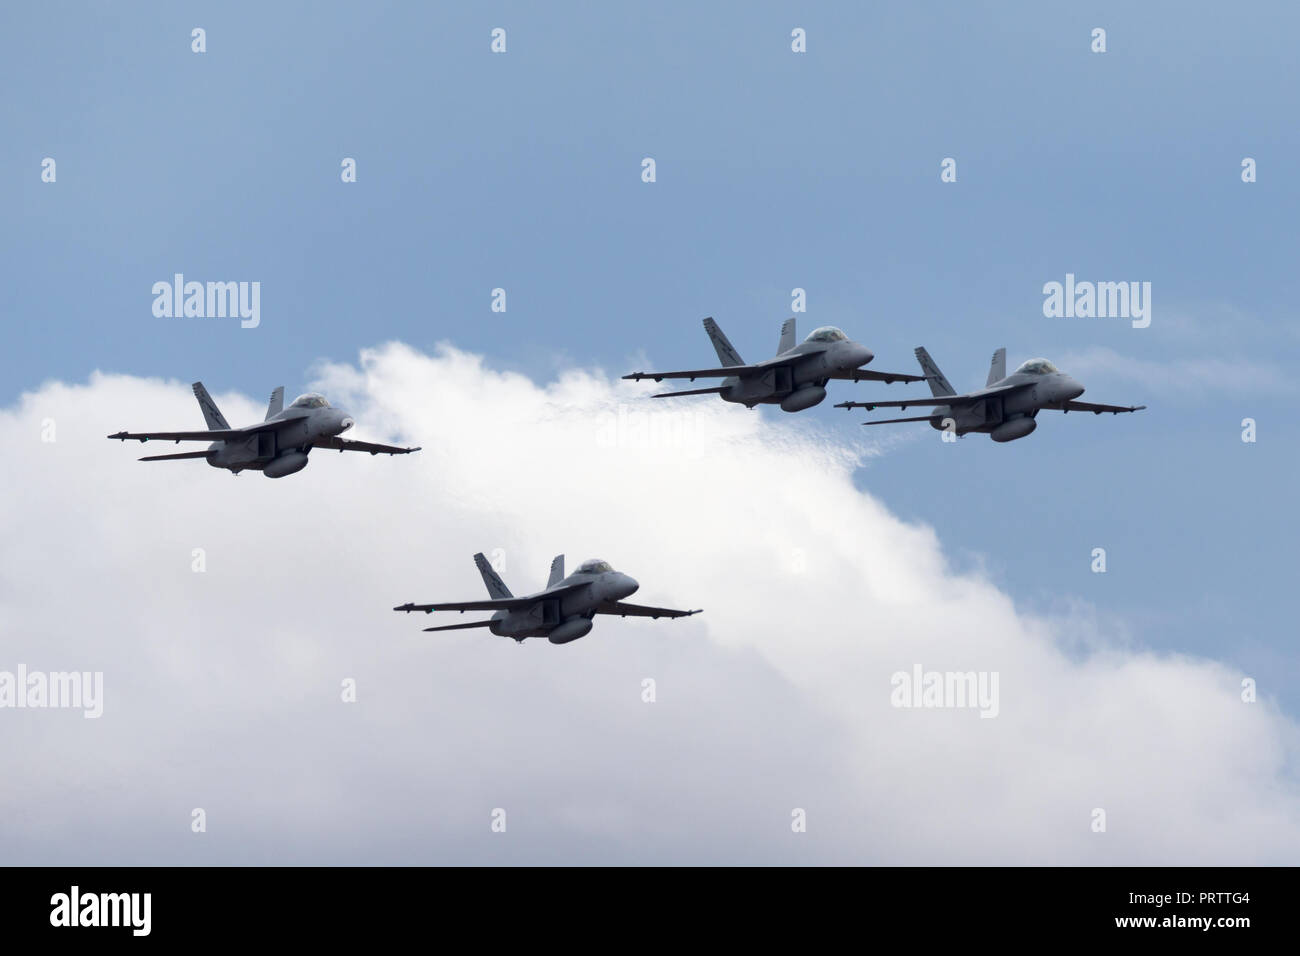 Four Royal Australian Air Force (RAAF) Boeing F/A-18F Super Hornet multirole fighter aircraft flying in formation. Stock Photo